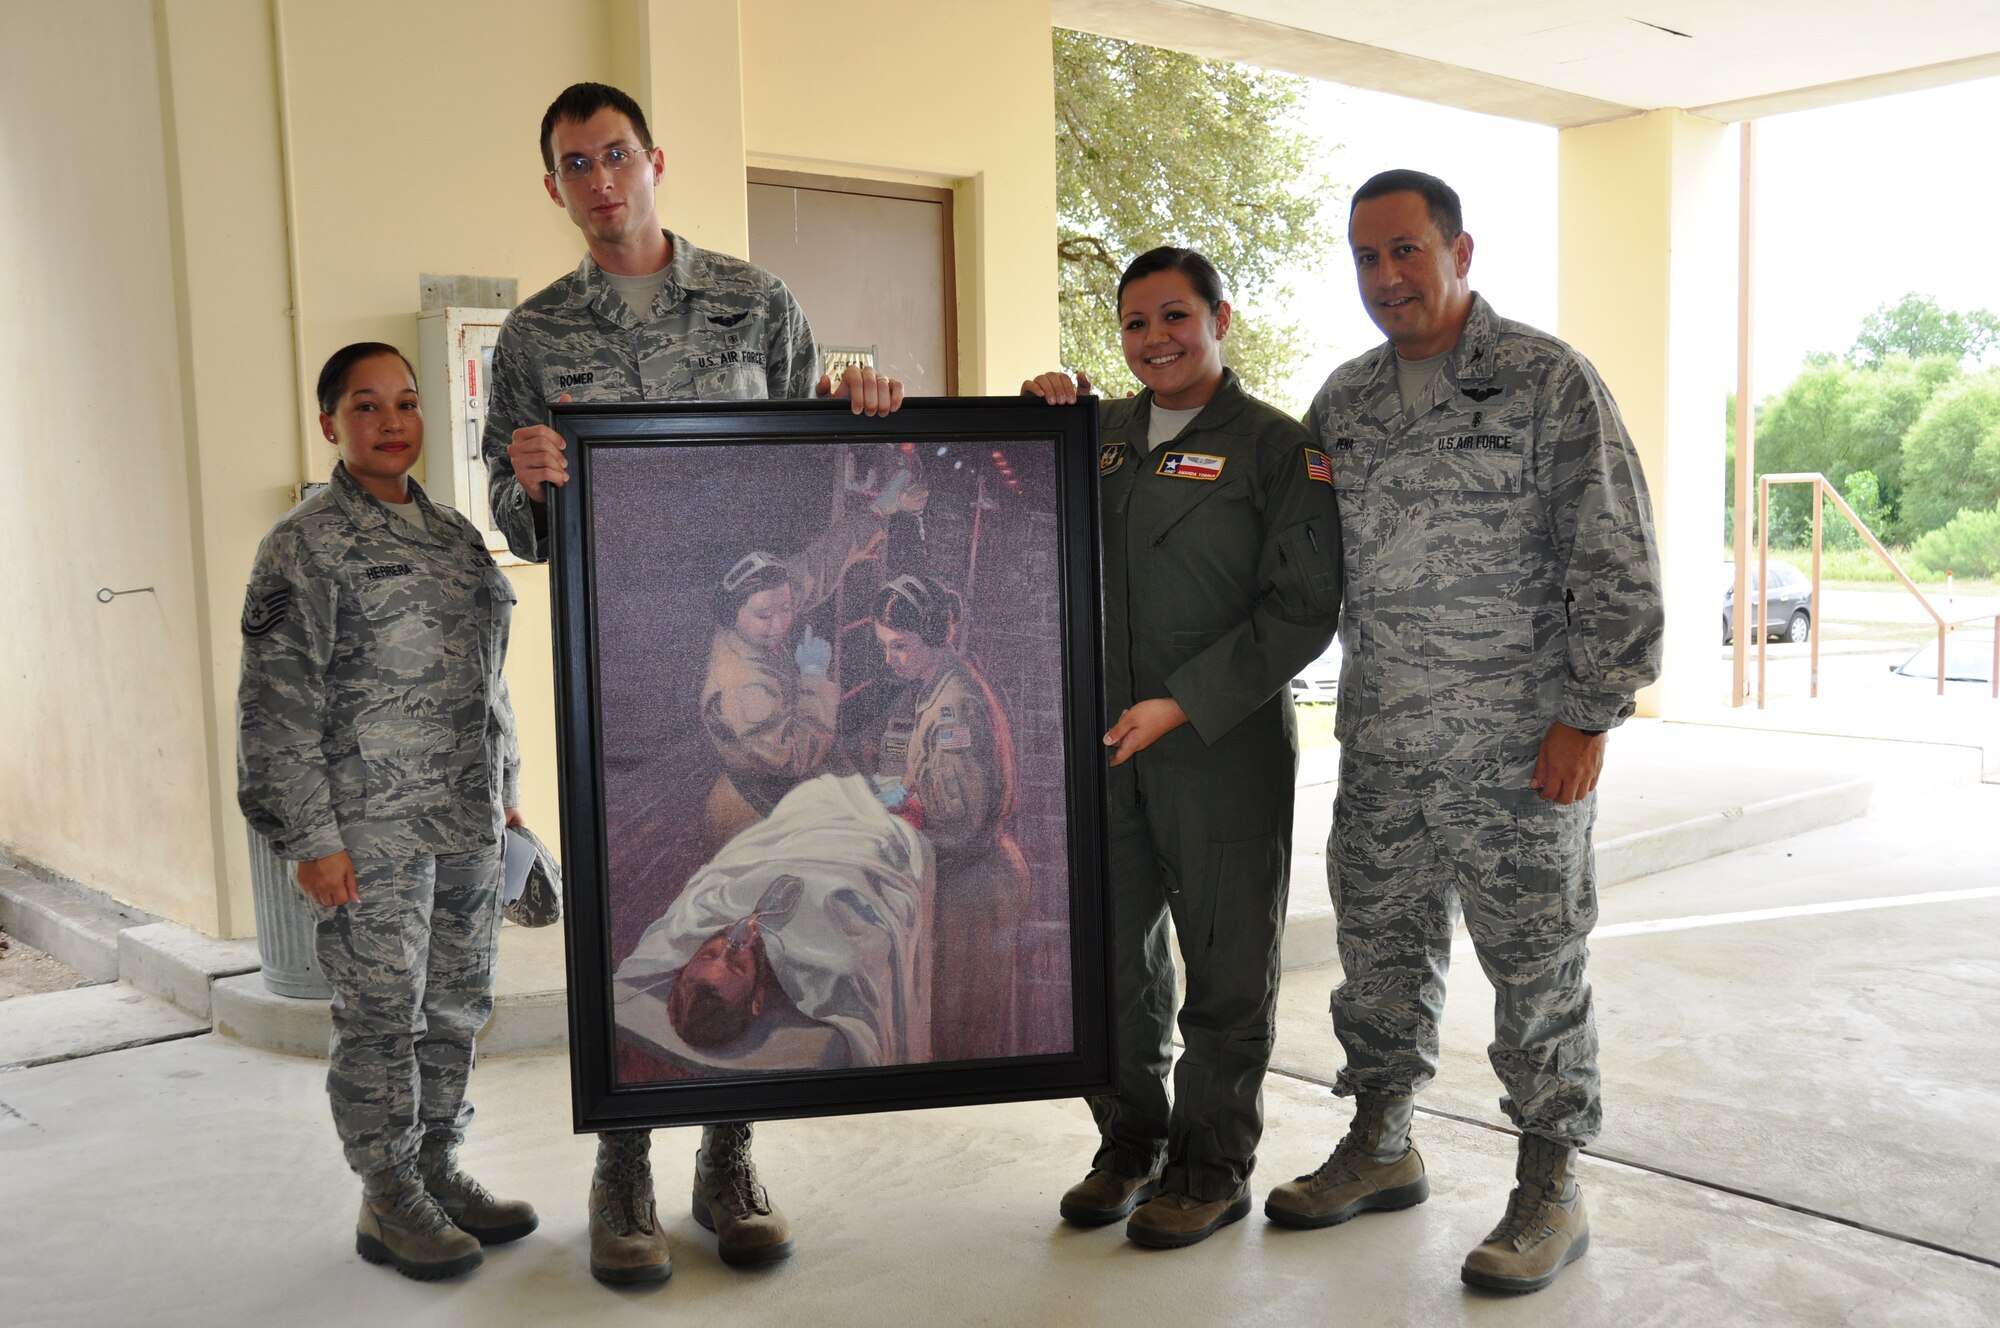 Senior Airman Michael Romer, a 433rd Aeromedical evacuation Squadron flight medic, holds the Bandage 33 portrait at the presentation on September 7, 2014 at Joint Base San Antonio-Lackland, Texas.Tech. Sgt. Kim Herrera, 433rd Airlift Wing historian (left), and Staff Sgt. Amanda Torres, 433rd Aeromedical Evacuation Squadron flight medic, and Col. Anthony Pena, 433rd Medical Squadron commander, who is Sergeant Torres' father. Torres is one of the two medical personnel portrayed saving the life of a Air Force Combat Controller. (U.S. Air Force Photo by Tech Sgt. Carlos J. Trevino)